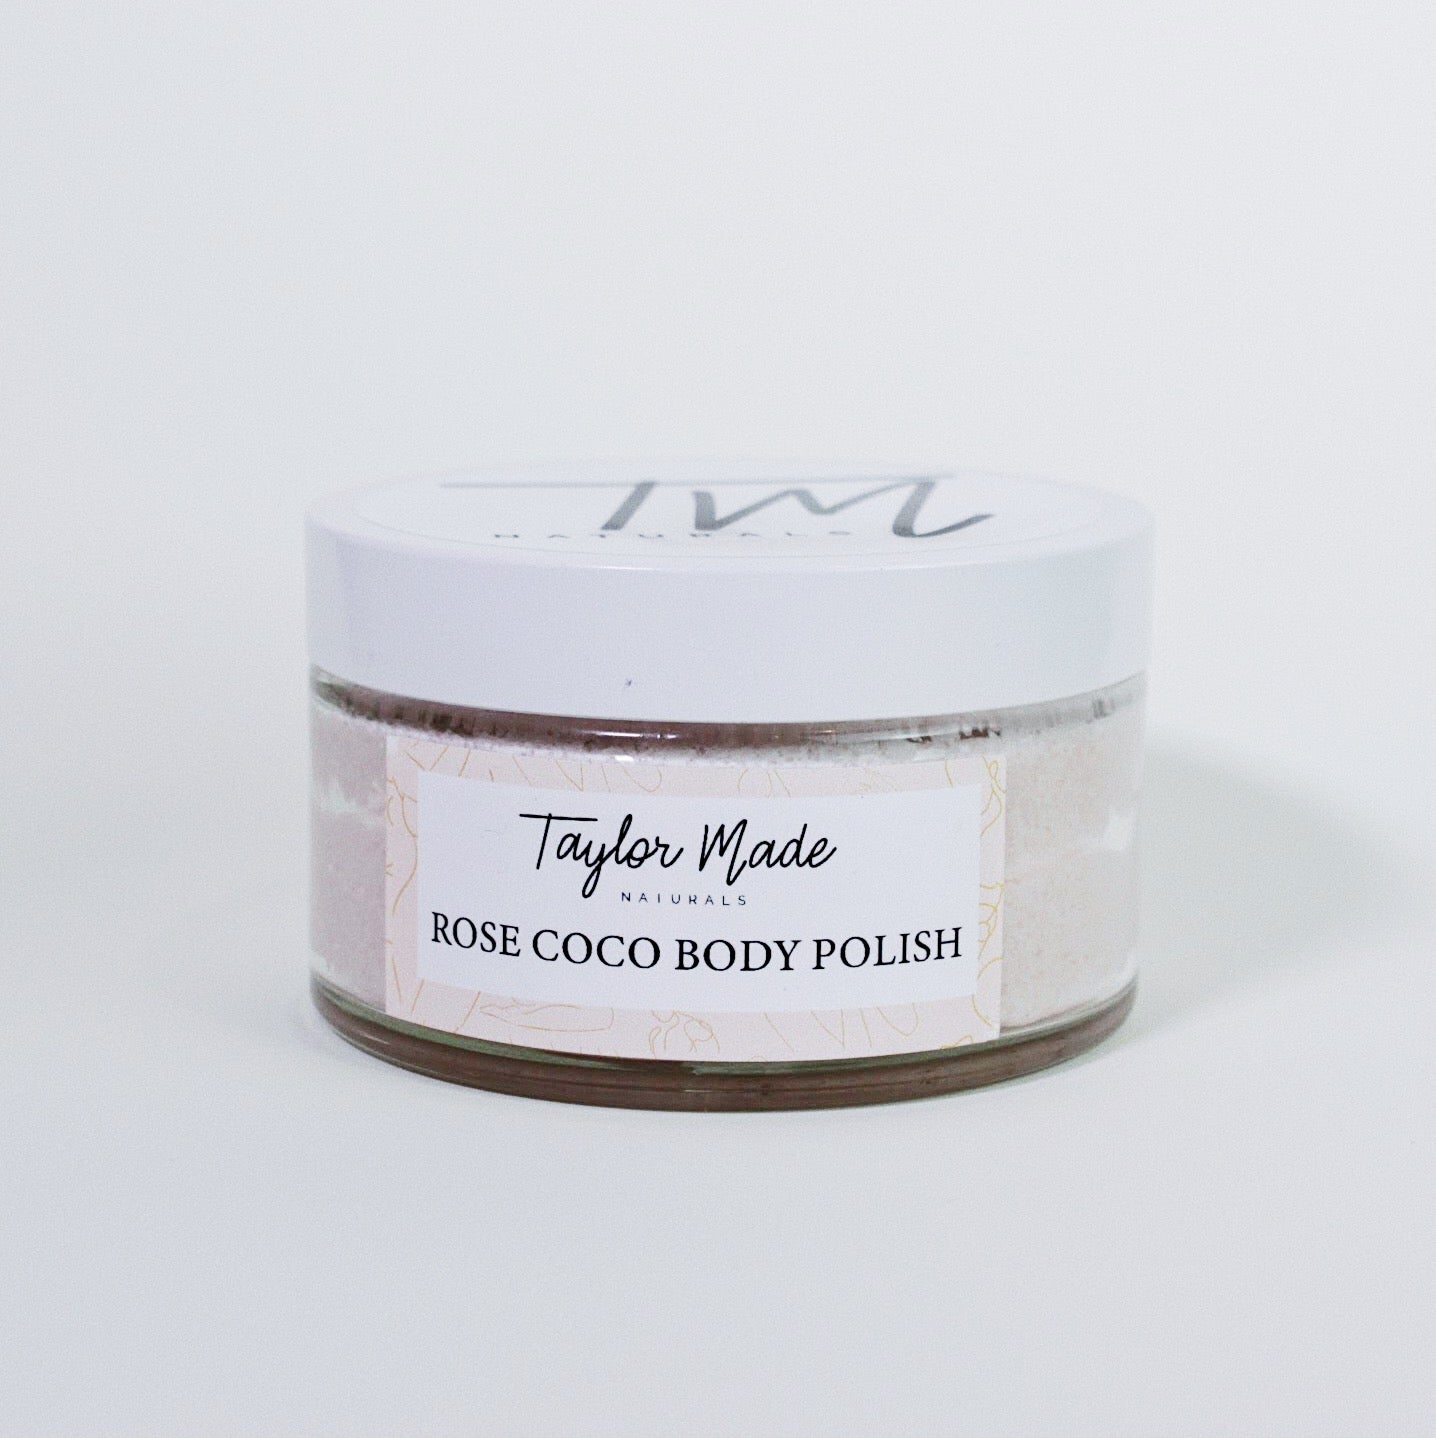 Cleanse, Exfoliate and Moisturise. Talk abut triple threat. Our Natural and Nourishing body polish removes dead skin cells and moisturises leaving the skin feeling silky and smooth and smelling sweet.   Unlike other sugar scrubs made with only oils and sugars, our emulsified body polish becomes a cream exfoliating lotion upon contact. Leaving soft supple skin and no oily residue behind.  